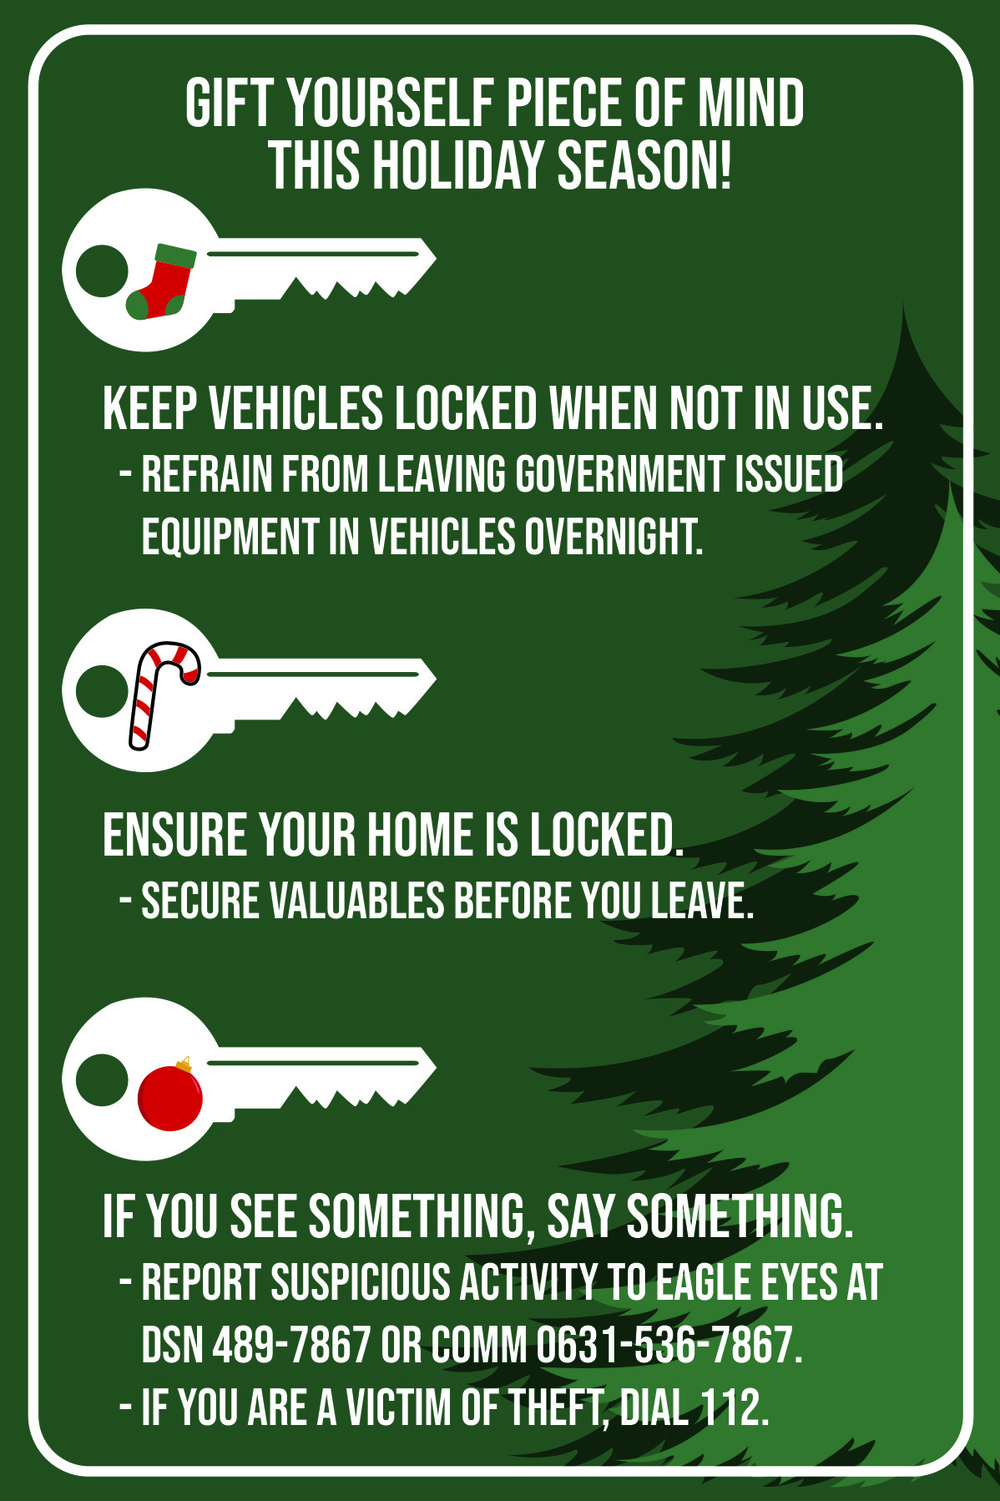 Staying safe for the holidays